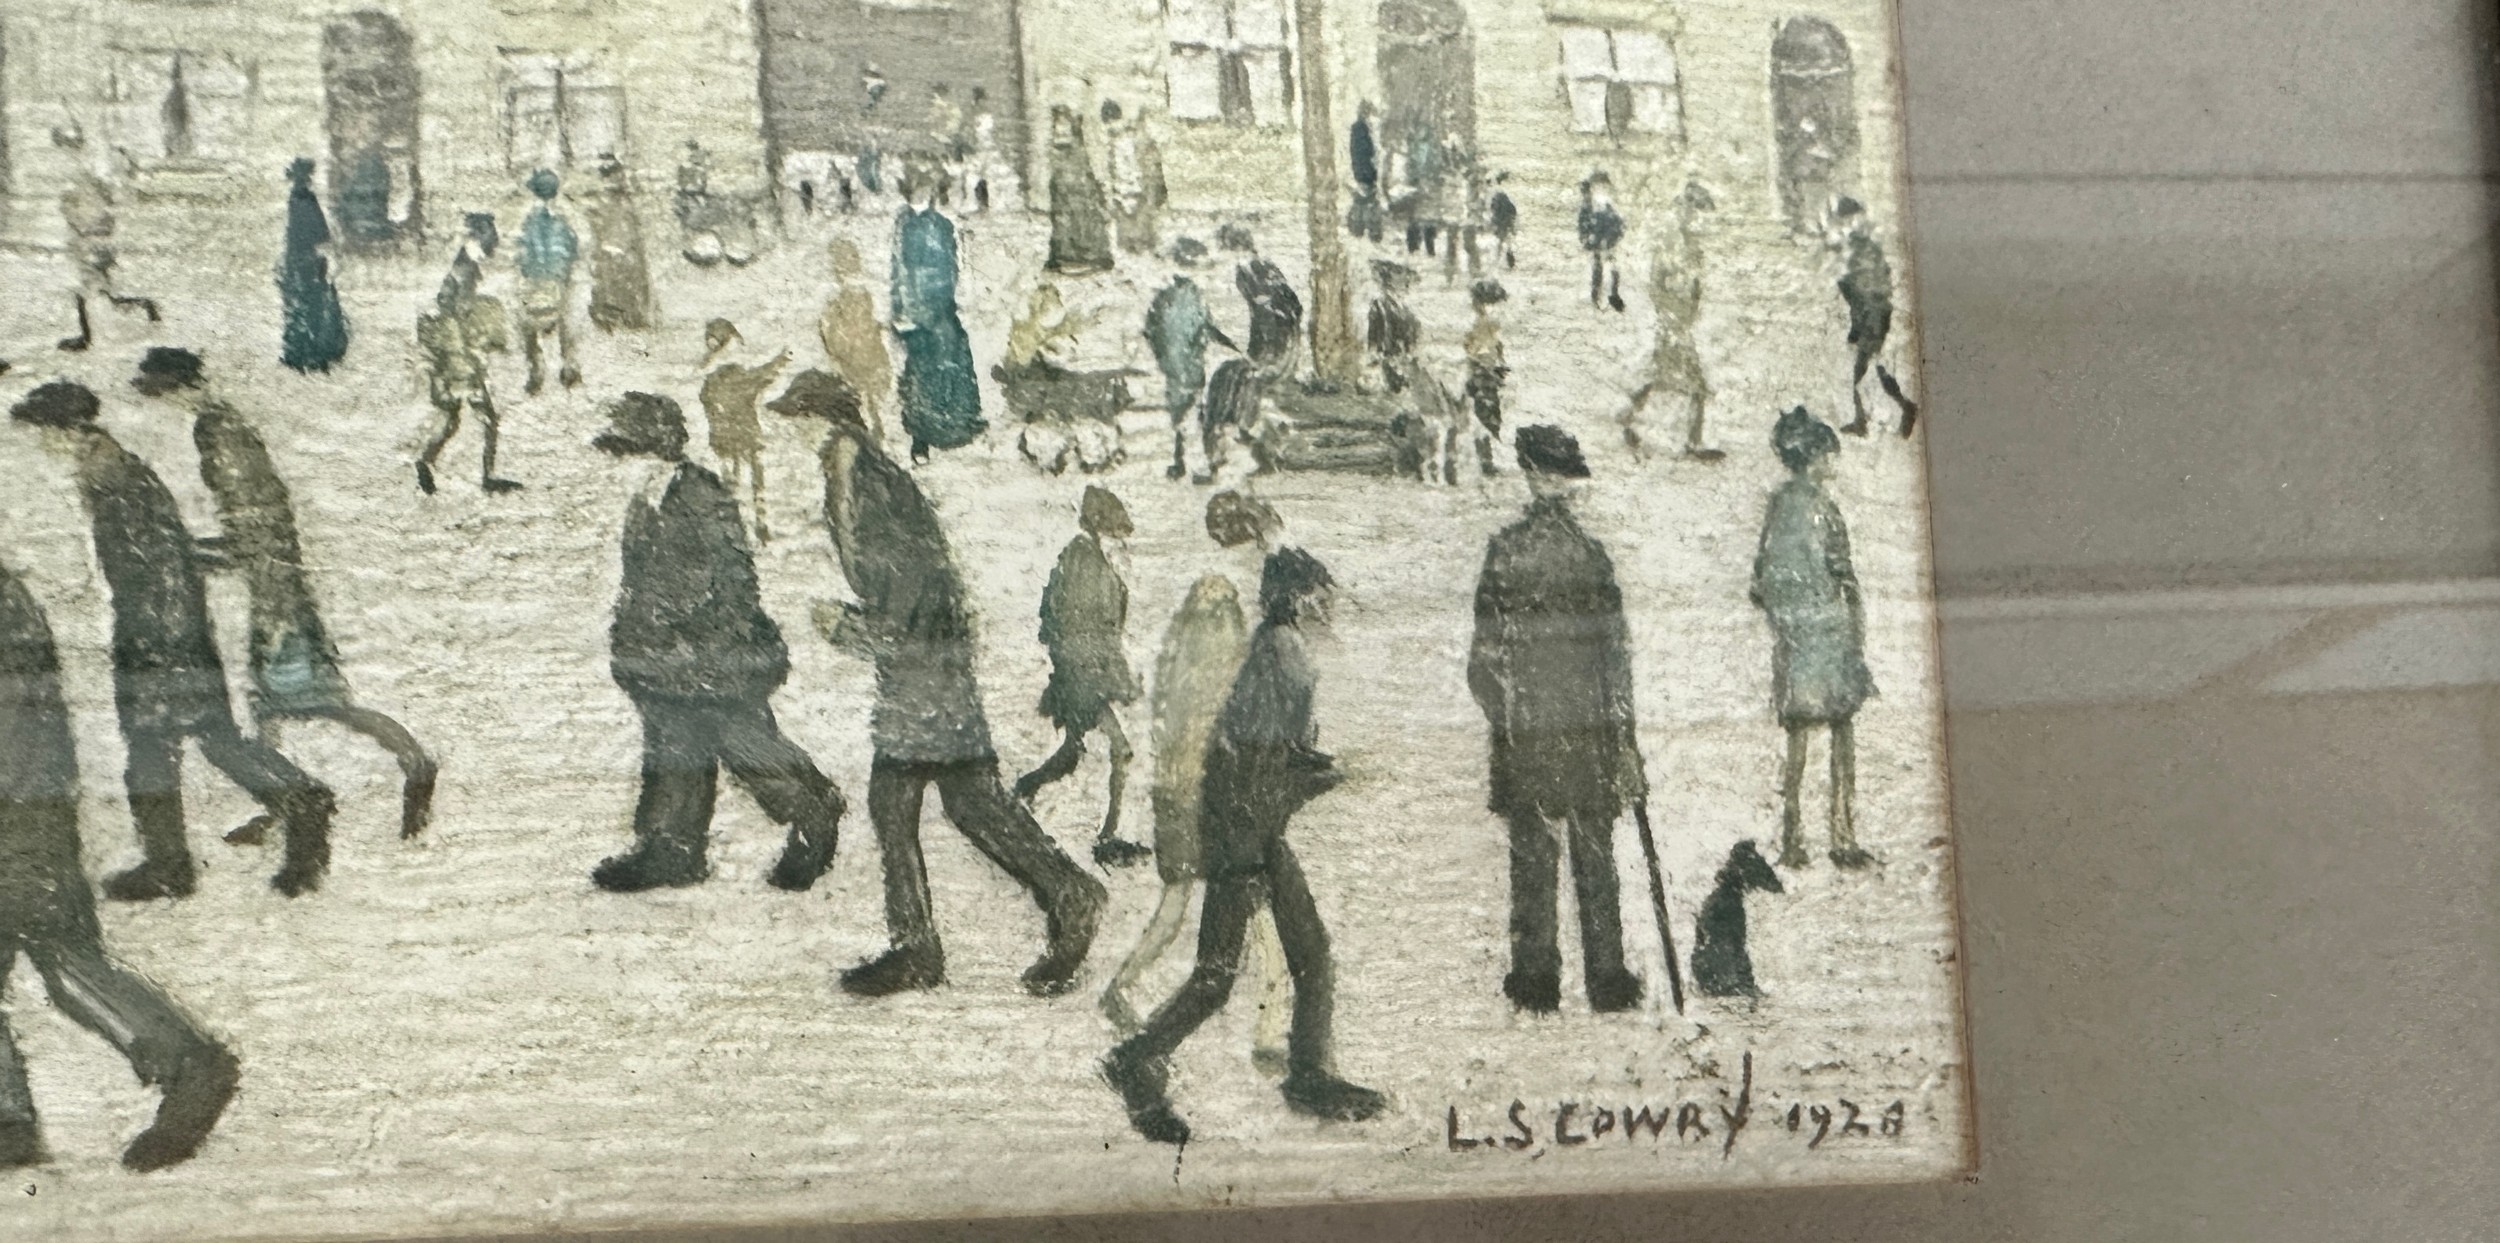 Framed Lowry Print frame measures approximately 48cm by 63cm - Image 3 of 3